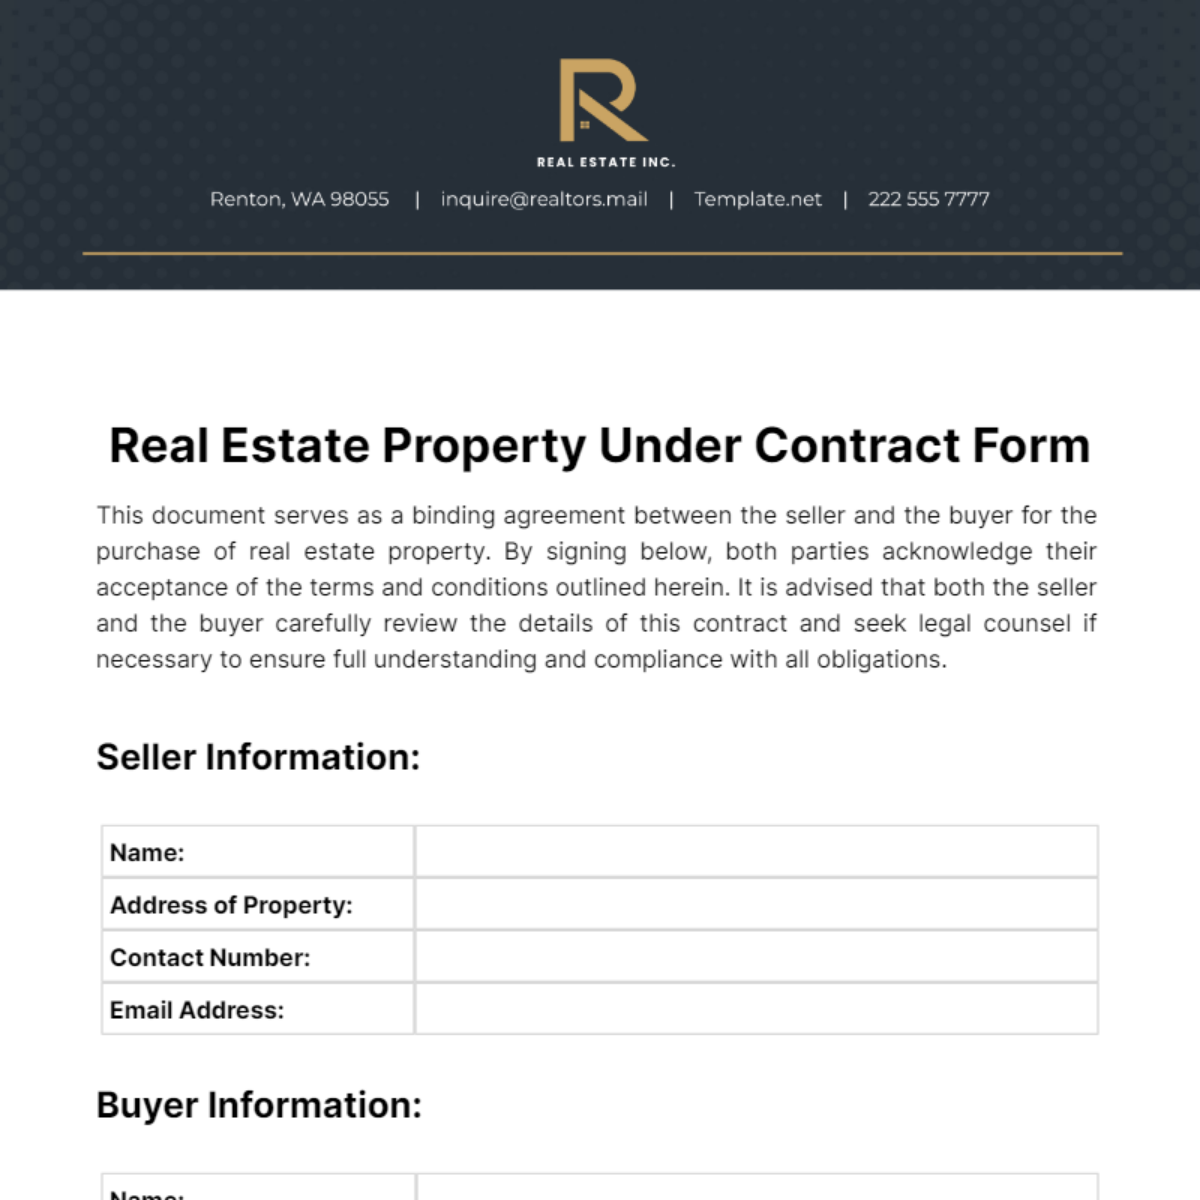 Free Real Estate Property Under Contract Form Template